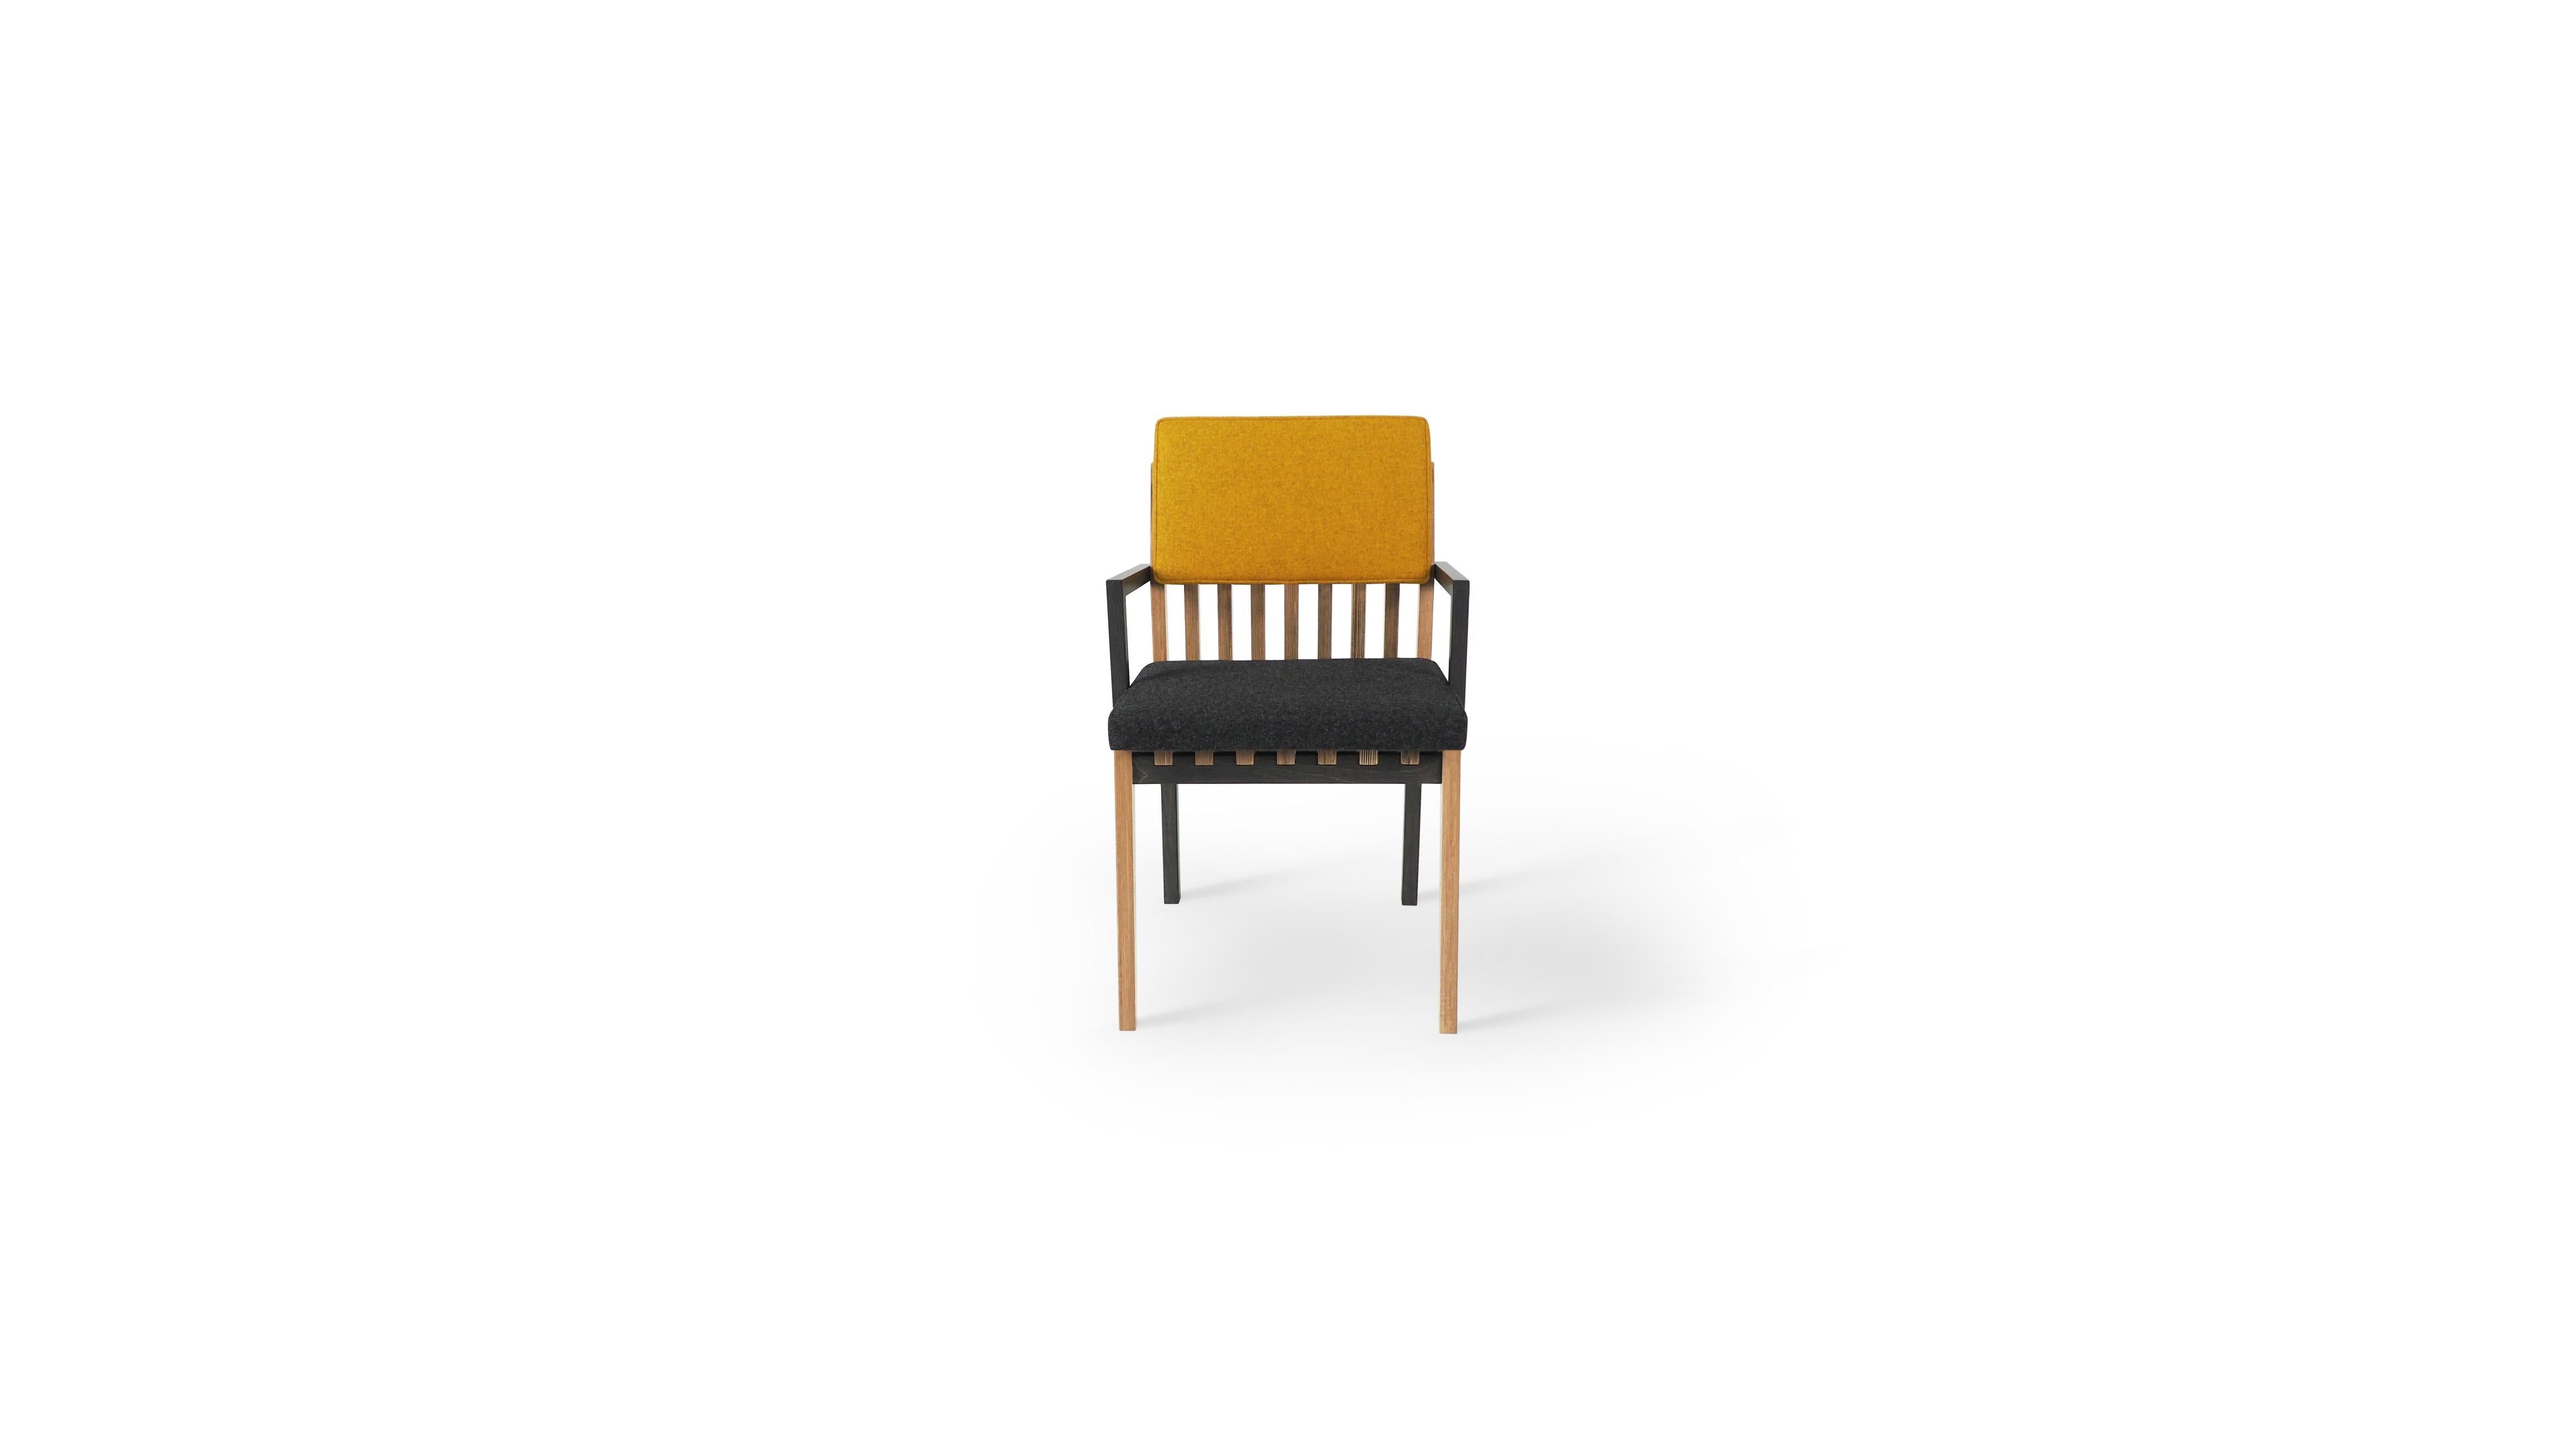 This dining chair takes exquisite inspiration from Danish design and Portuguese heritage through the most modern of production methods to bring you a timeless yet ultra-modern crafted design.
The unique arms of the chair embrace the whole piece in